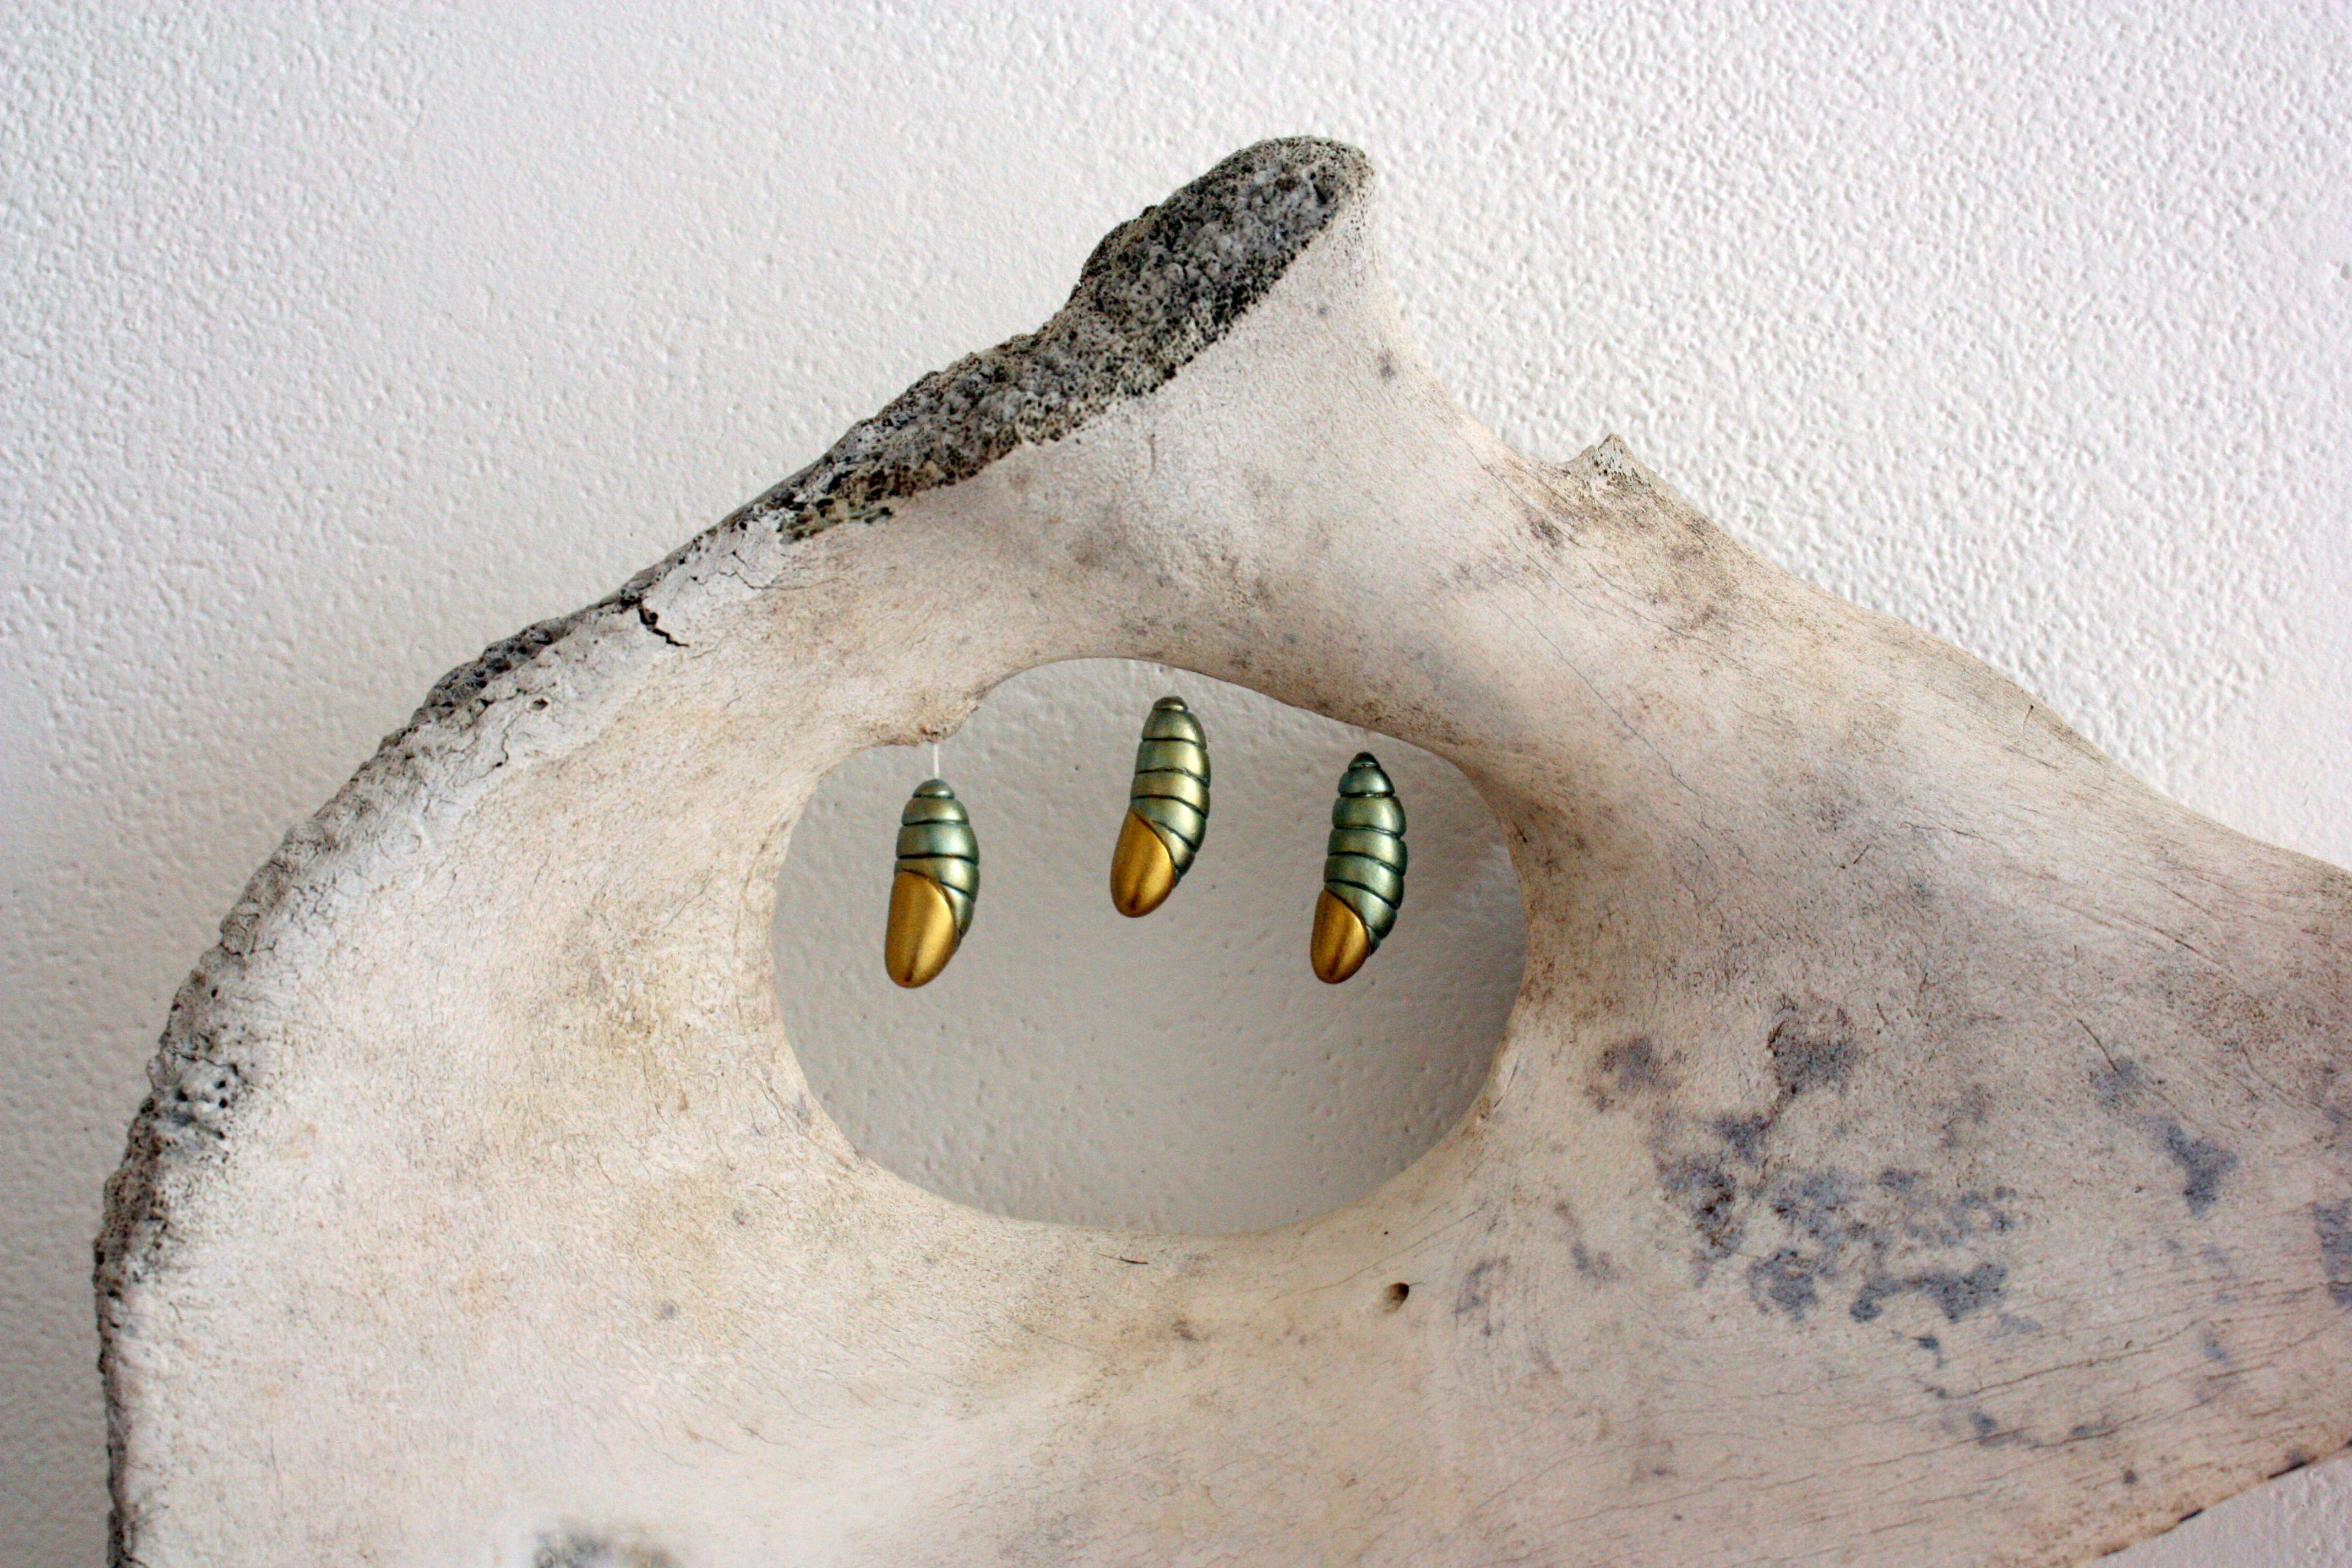 Three delicate and meticulously crafted cocoons hang from the oval opening in a found bone.  Sculpted by hand out of a durable epoxy resin clay and painted with fine metallic paint by the New York artist Bethany Krull the cocoons represent growth